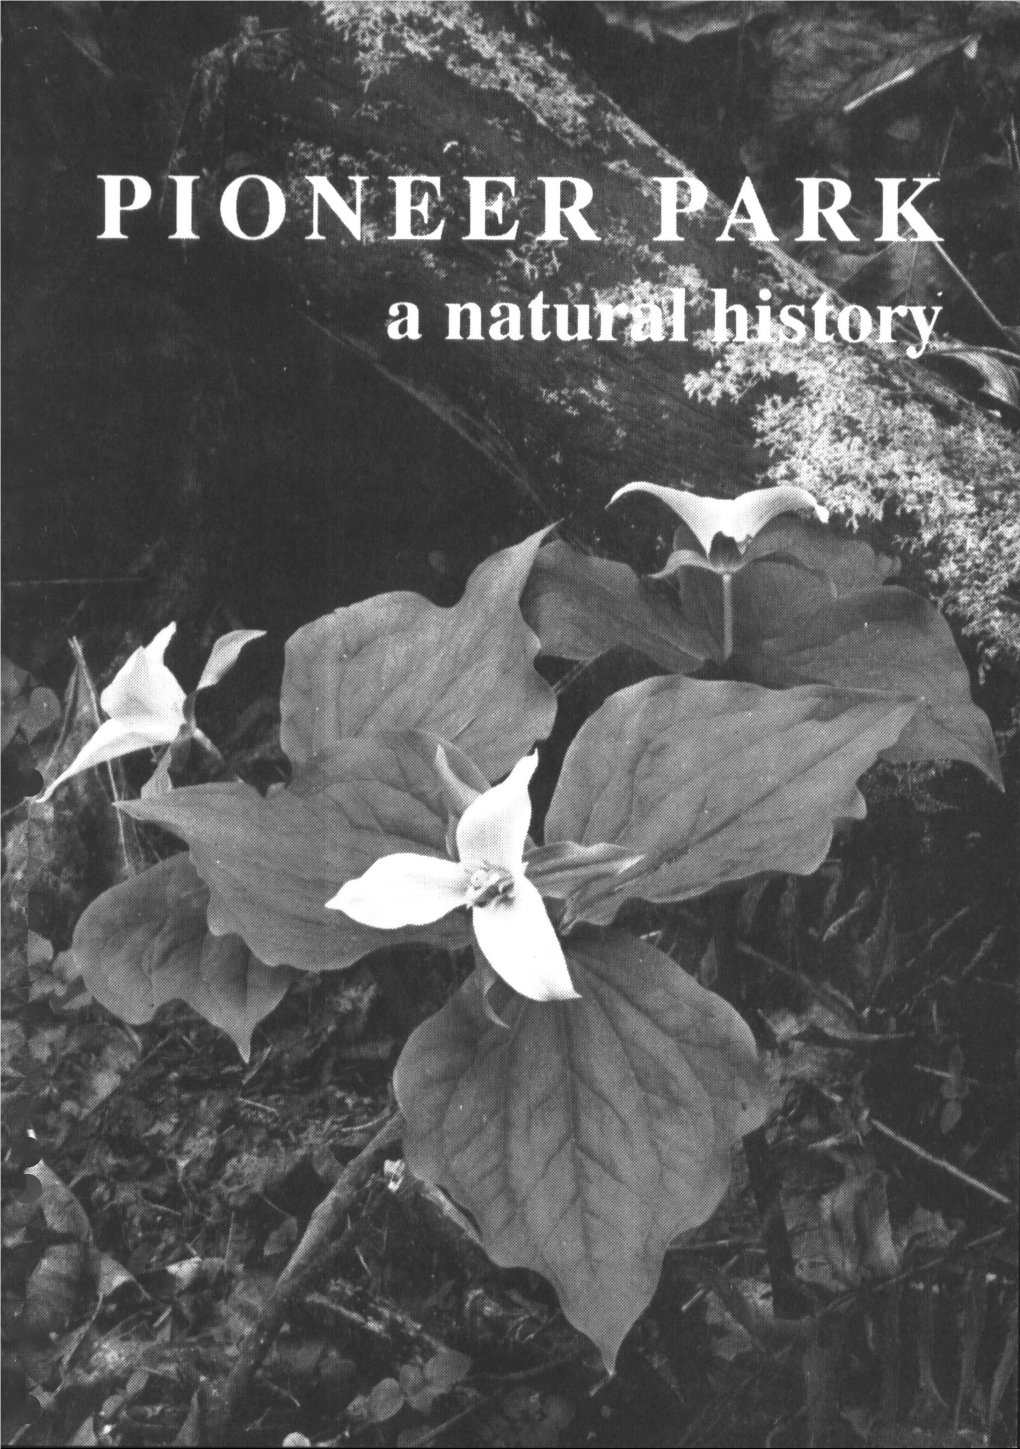 View a Natural History of Pioneer Park